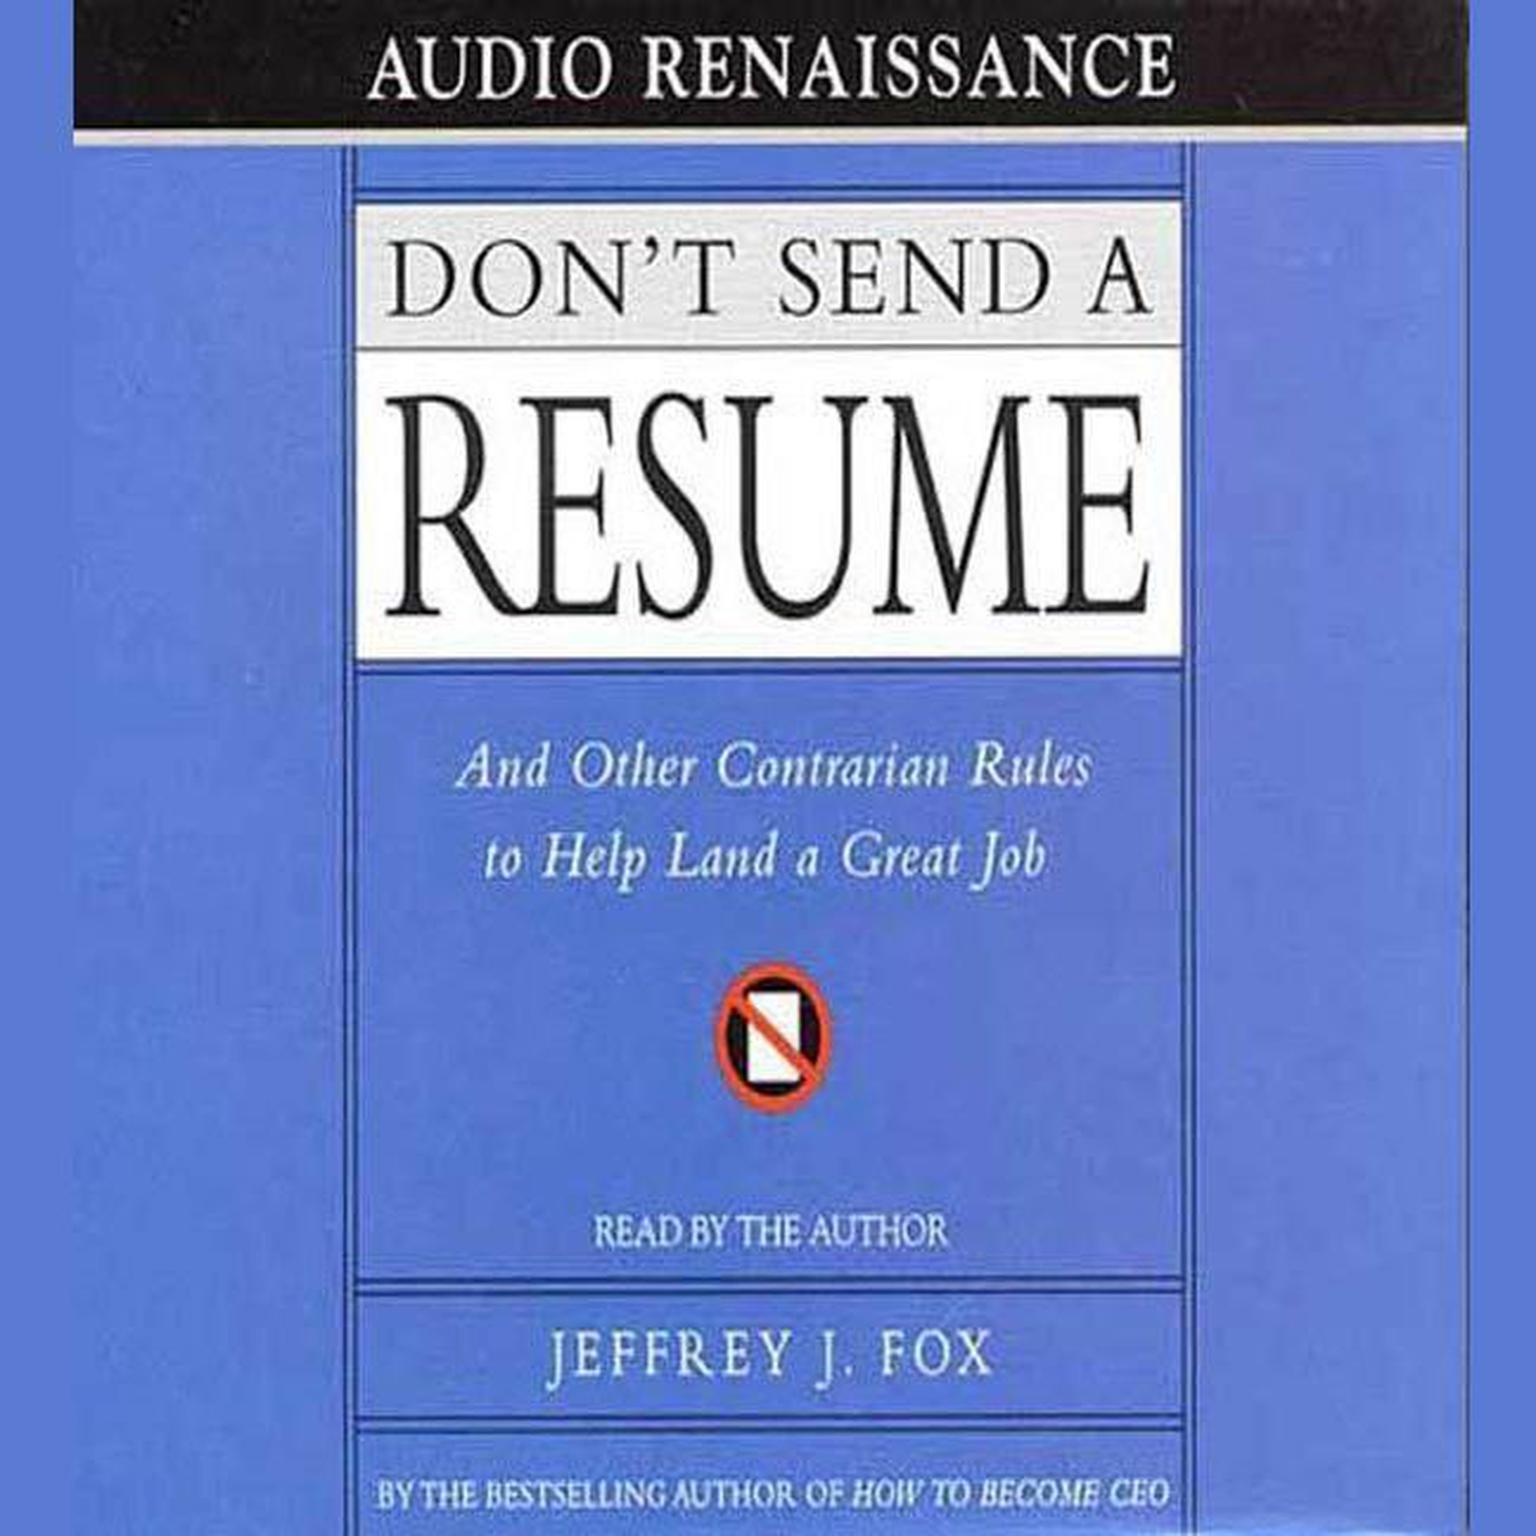 Dont Send a Resume (Abridged): And Other Contrarian Rules to Help Land a Great Job Audiobook, by Jeffrey J. Fox